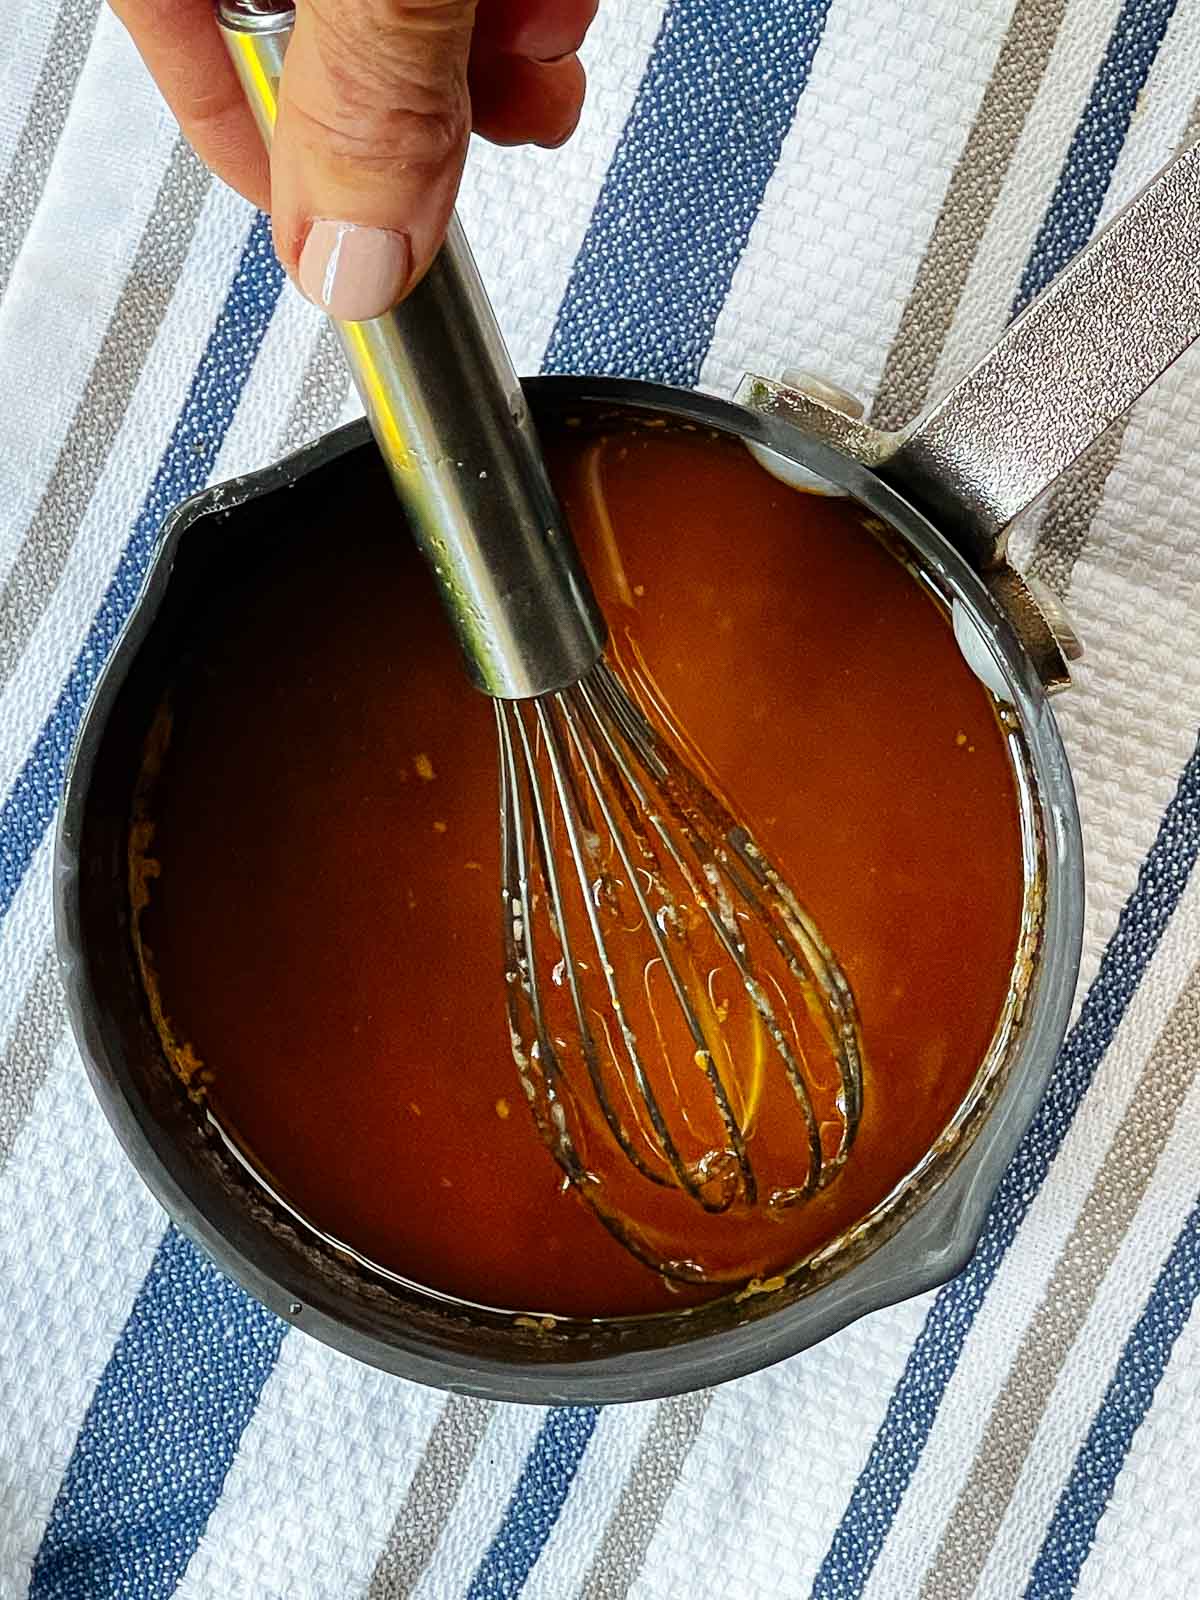 A hand with a whisk stirring a sriracha sauce mxture in a small sauce pan on top of a striped kitchen towel.